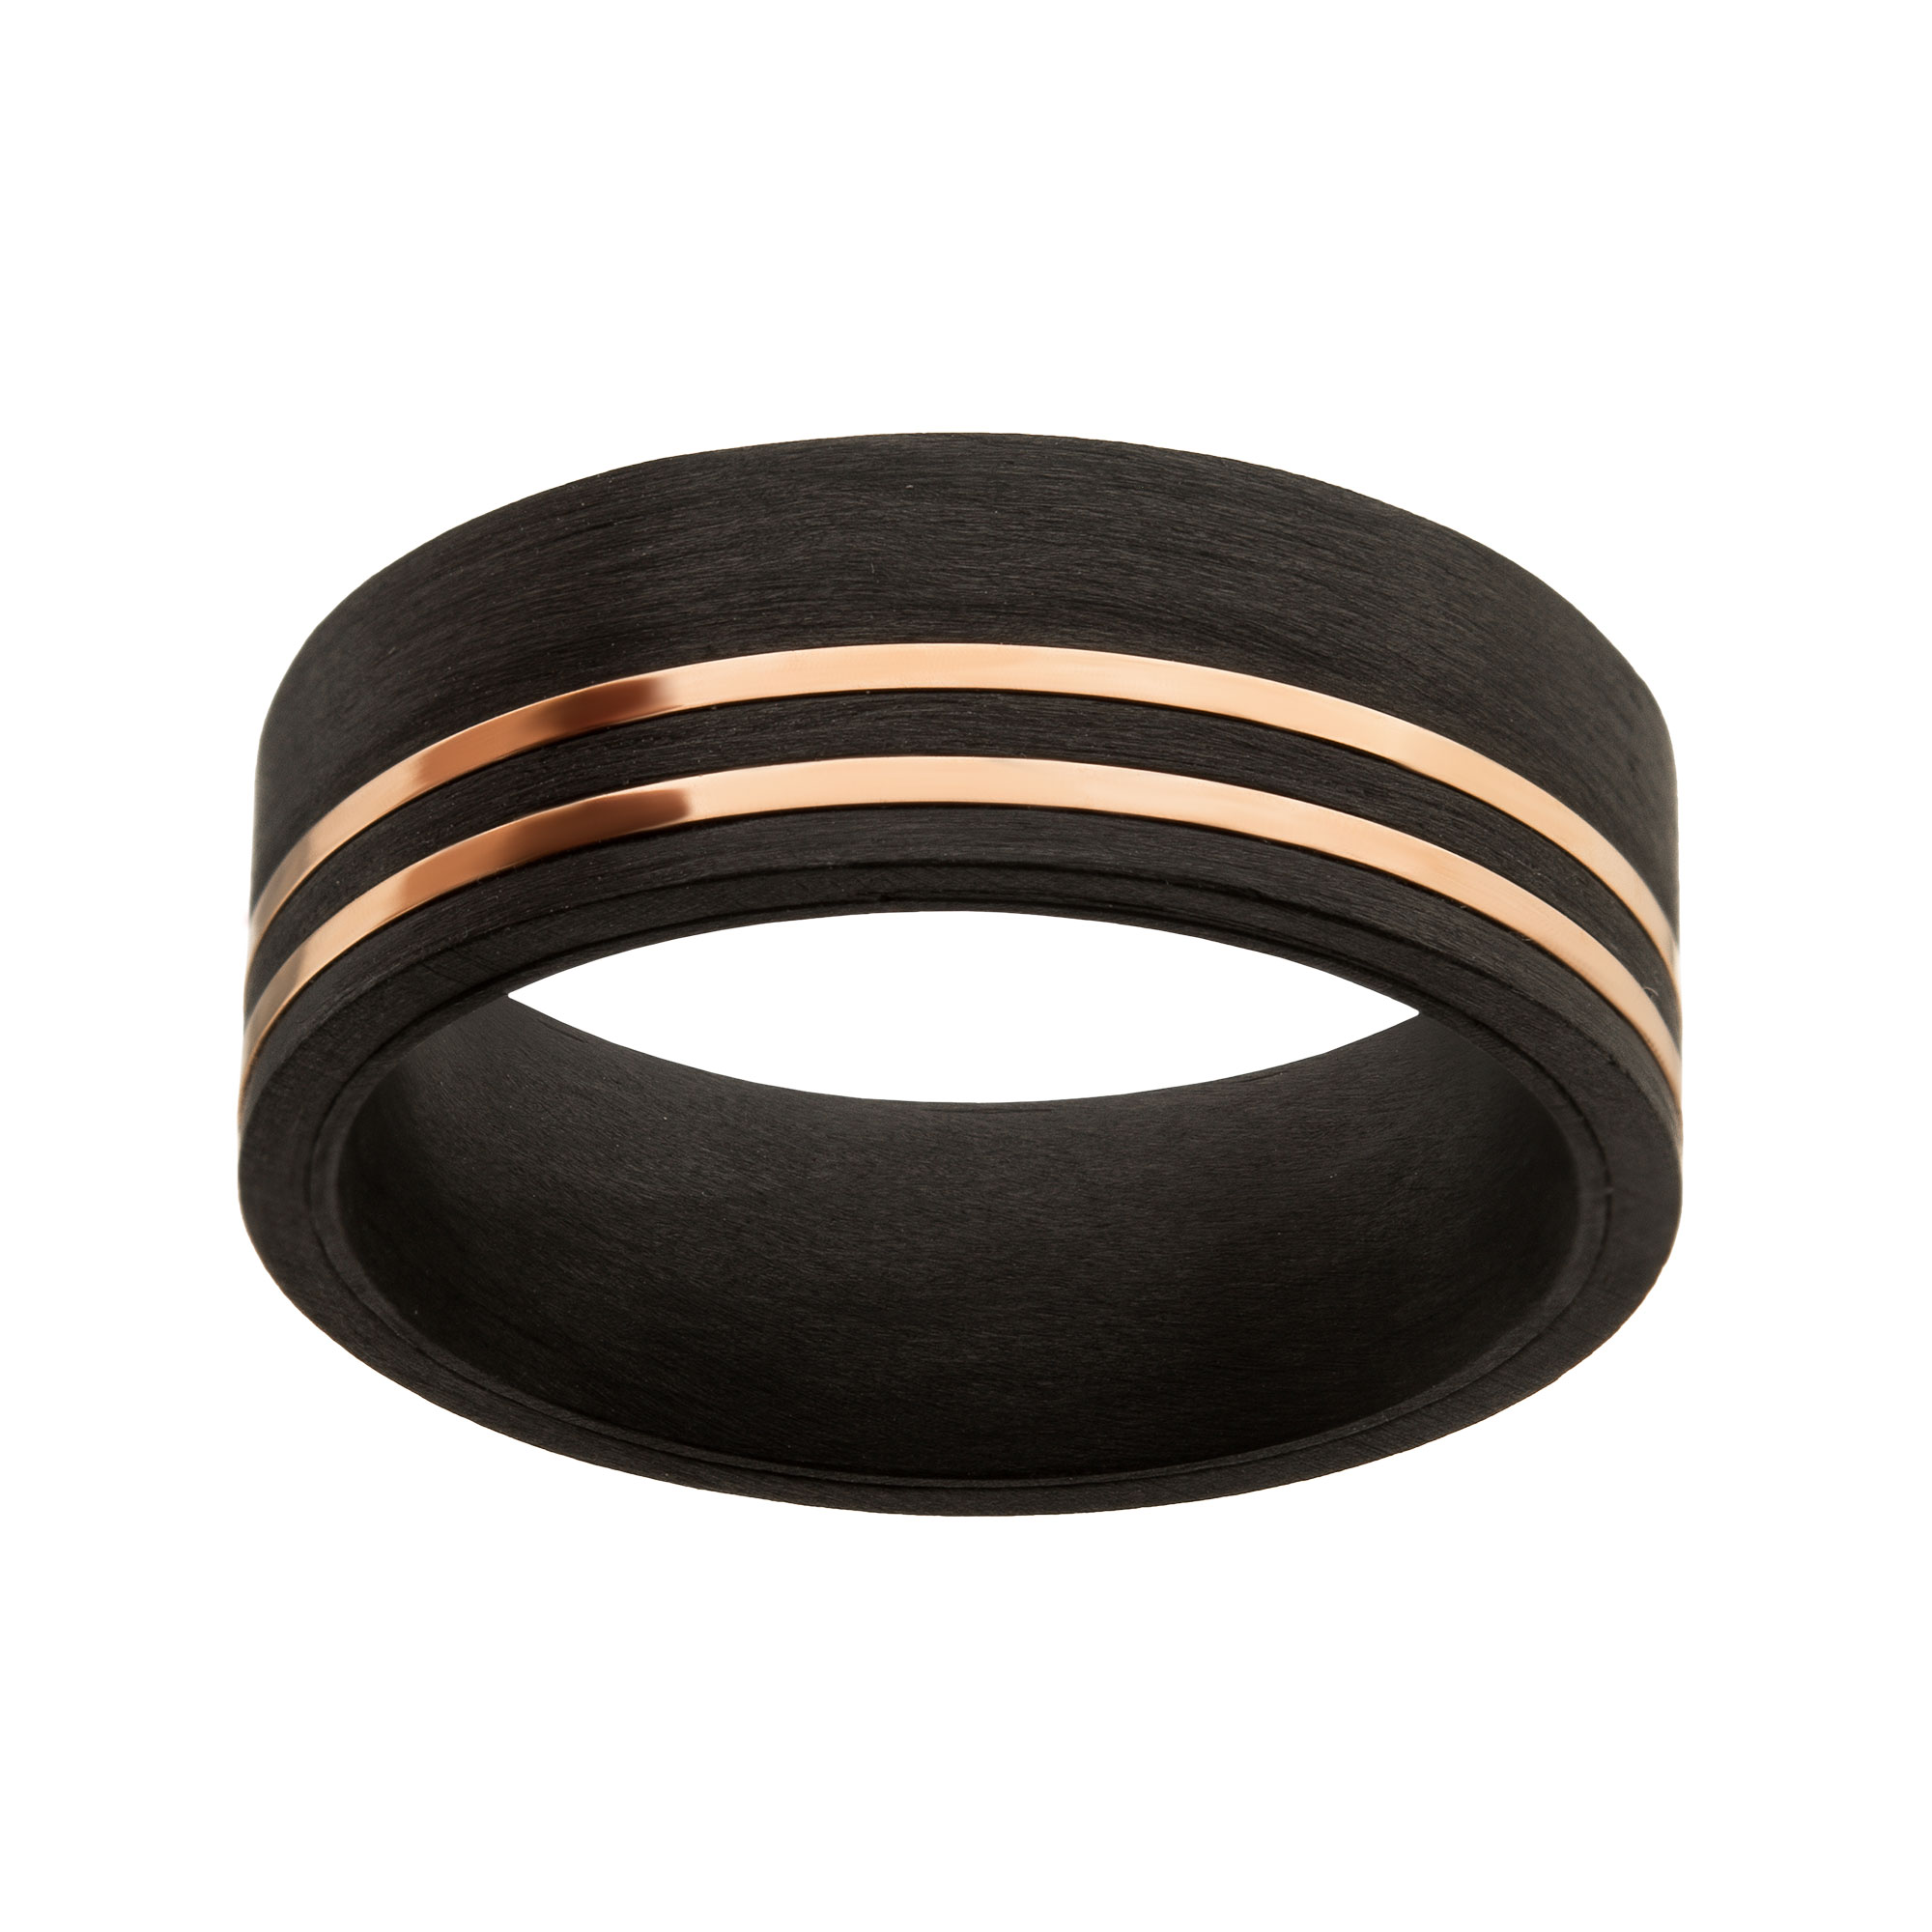 Solid Carbon with Inlayed Rose Gold Thin Lines Comfort Fit Ring Image 2 Spath Jewelers Bartow, FL